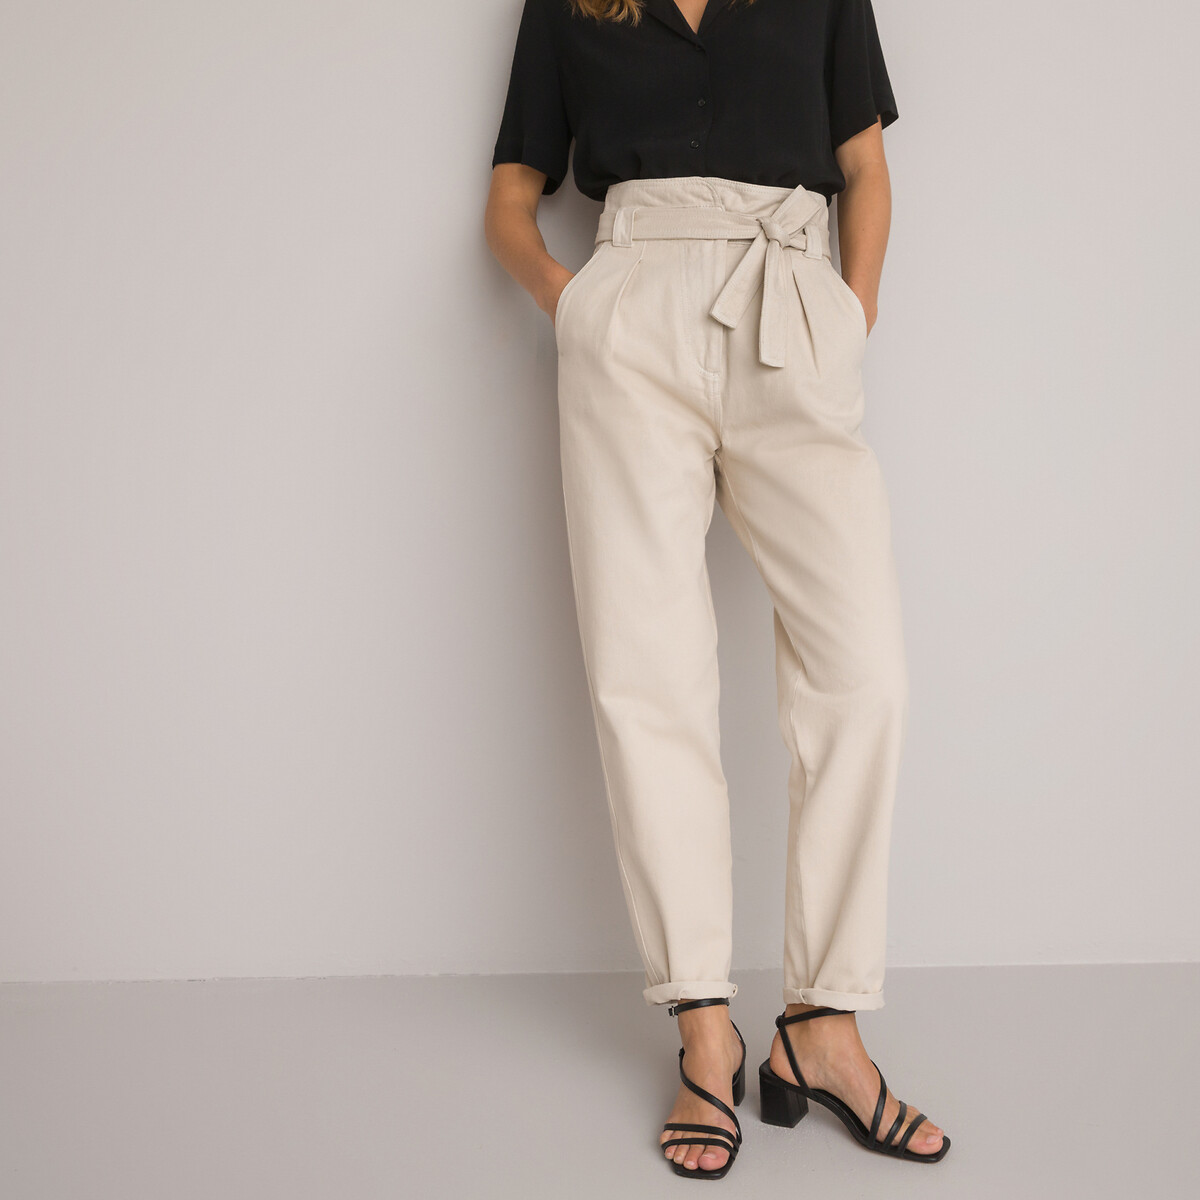 Cotton Cigarette Trousers with Tie-Waist, Length 30.5"